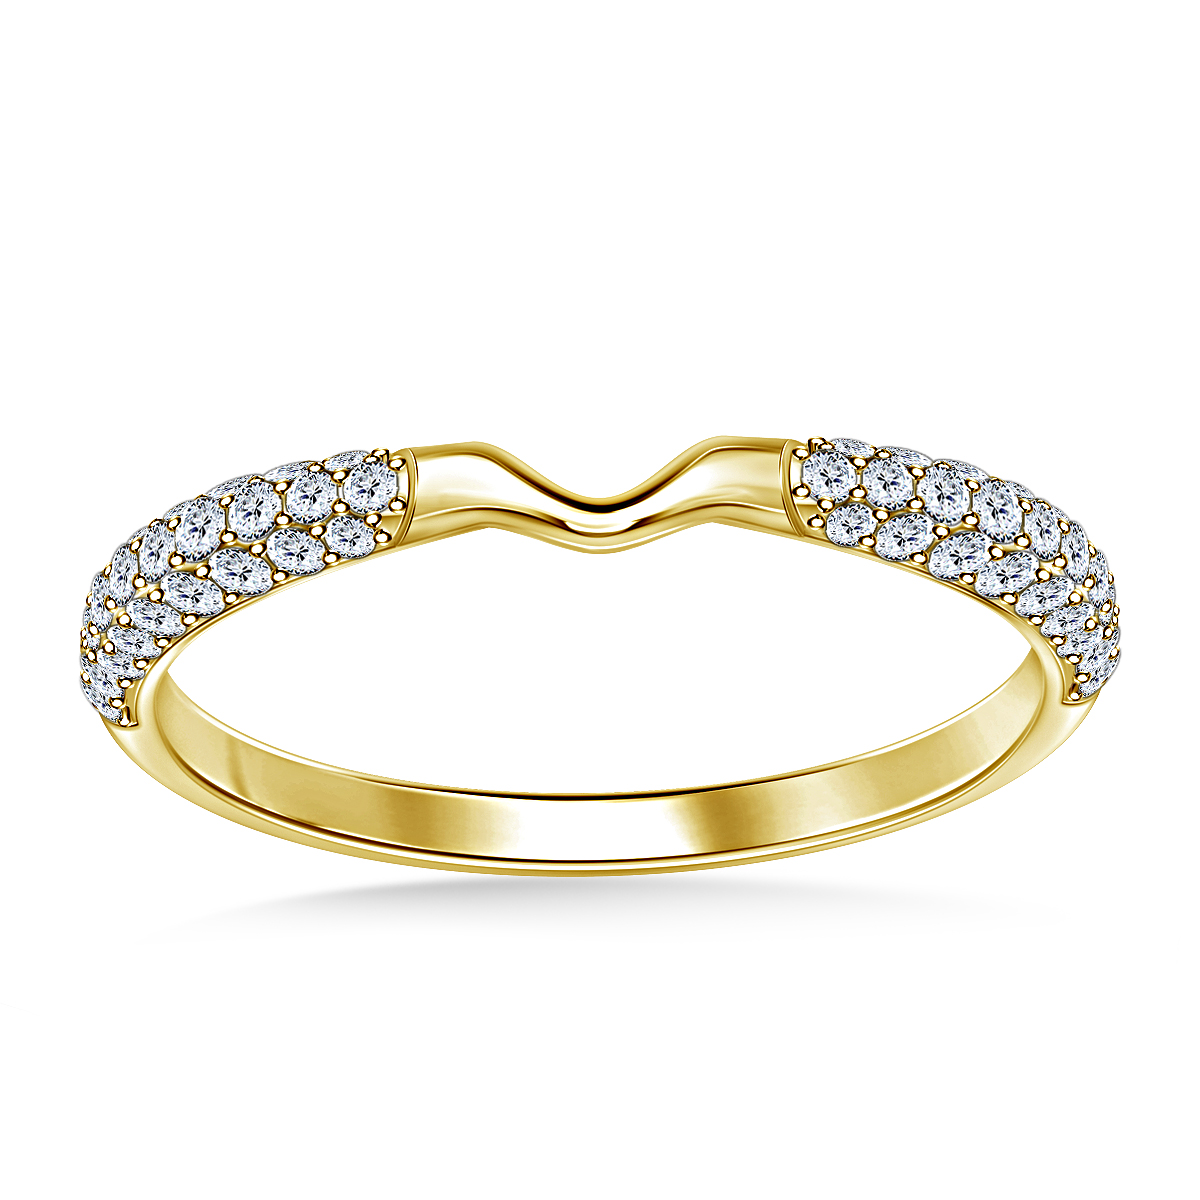 Matching Curved Diamond Wedding Band In 14k Yellow Gold 13 Cttw